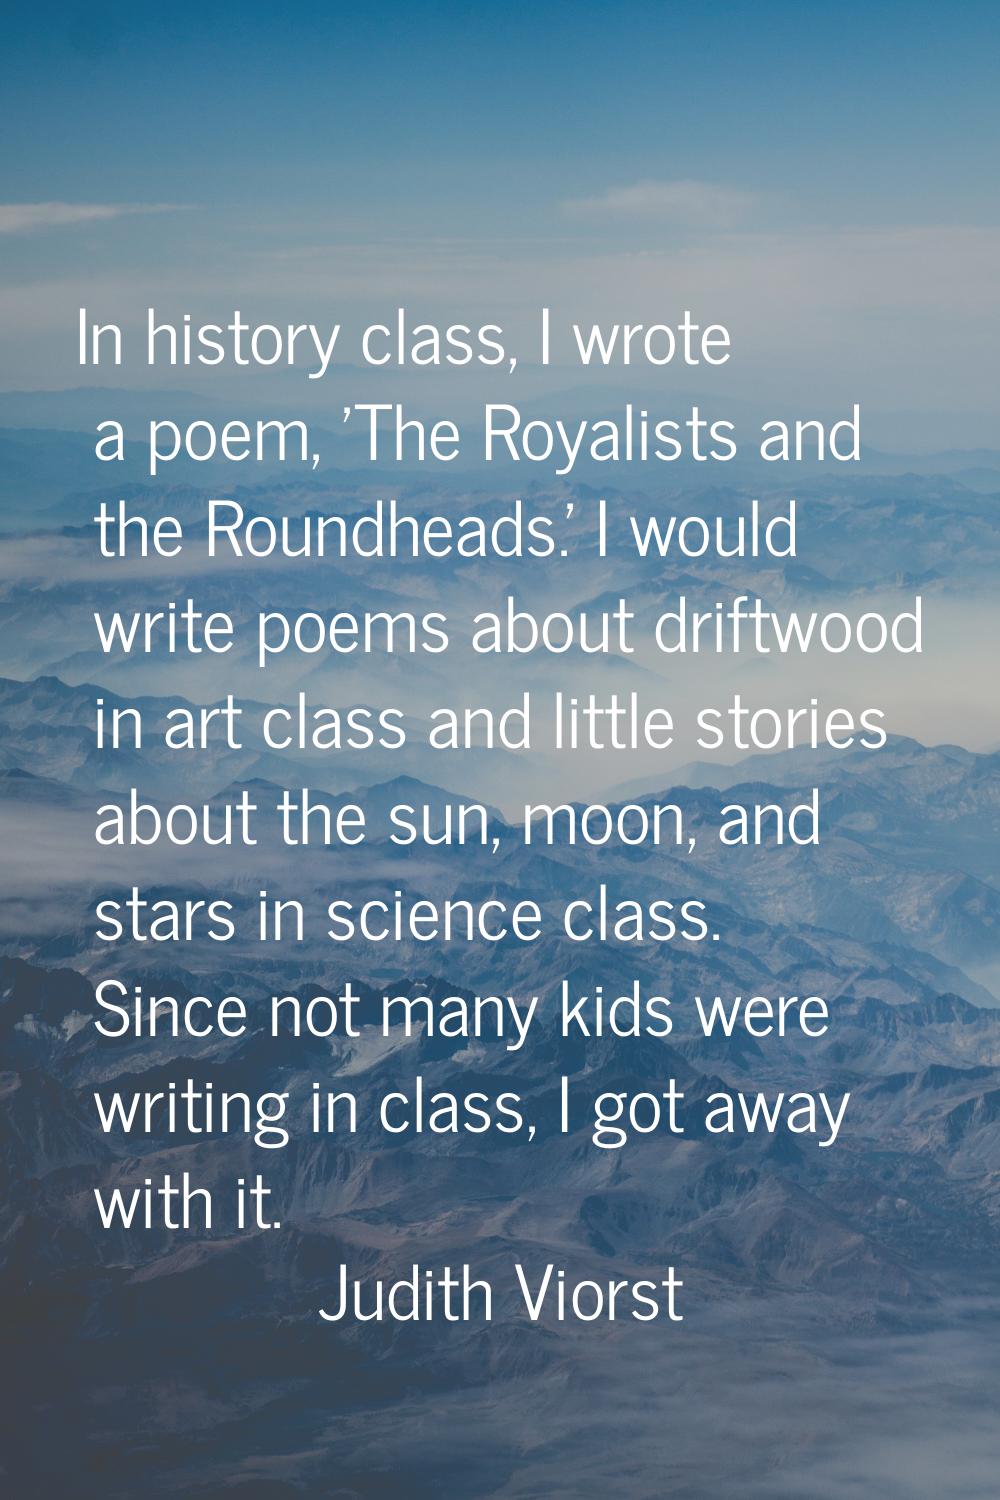 In history class, I wrote a poem, 'The Royalists and the Roundheads.' I would write poems about dri